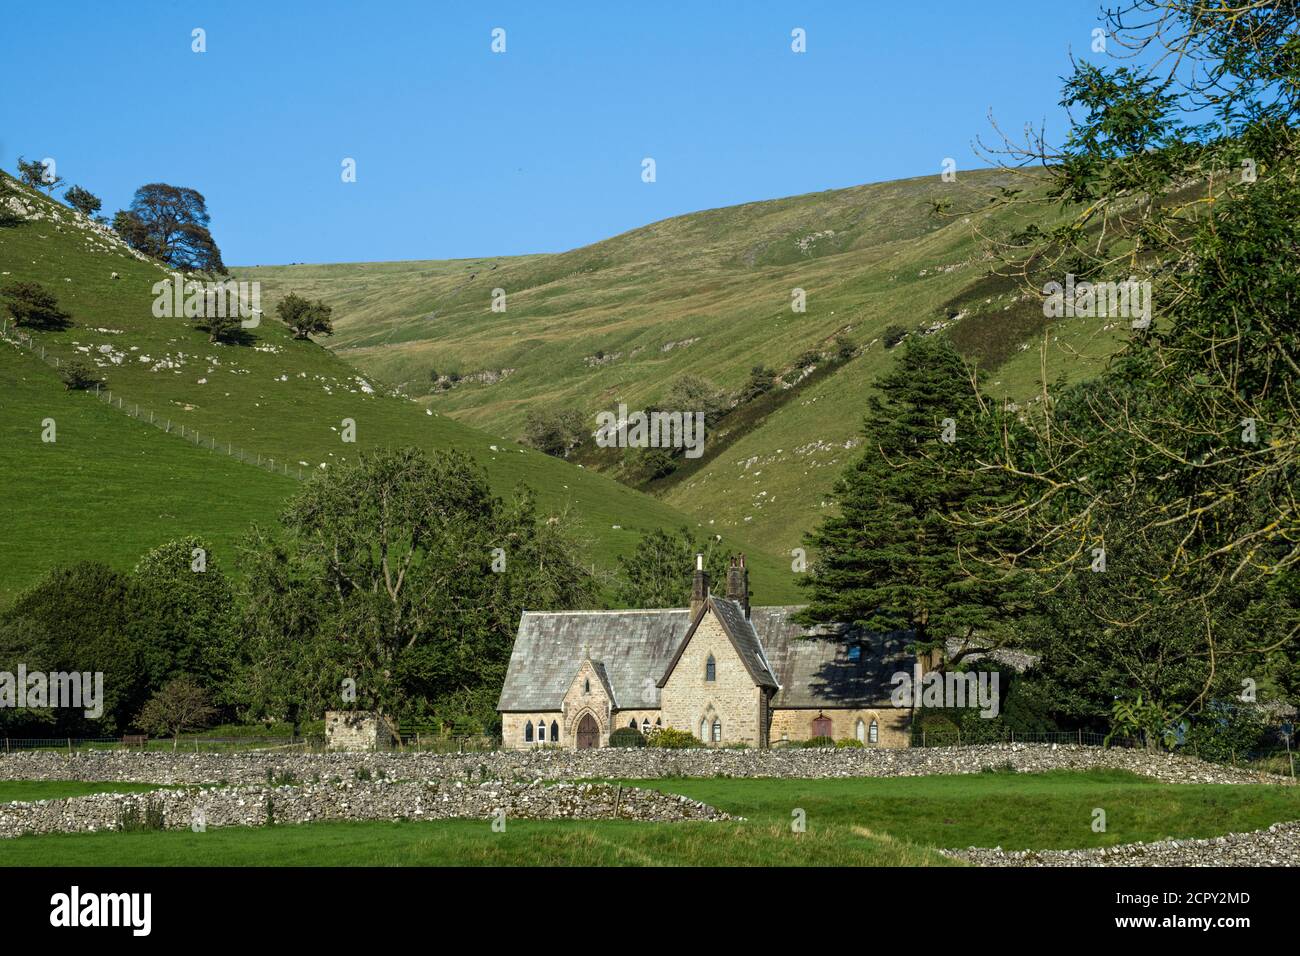 Buckden Old School House fronting Buckden Ghyll behind it, in Upper Wharfedale in the Yorkshire Dales National Park in September. Stock Photo